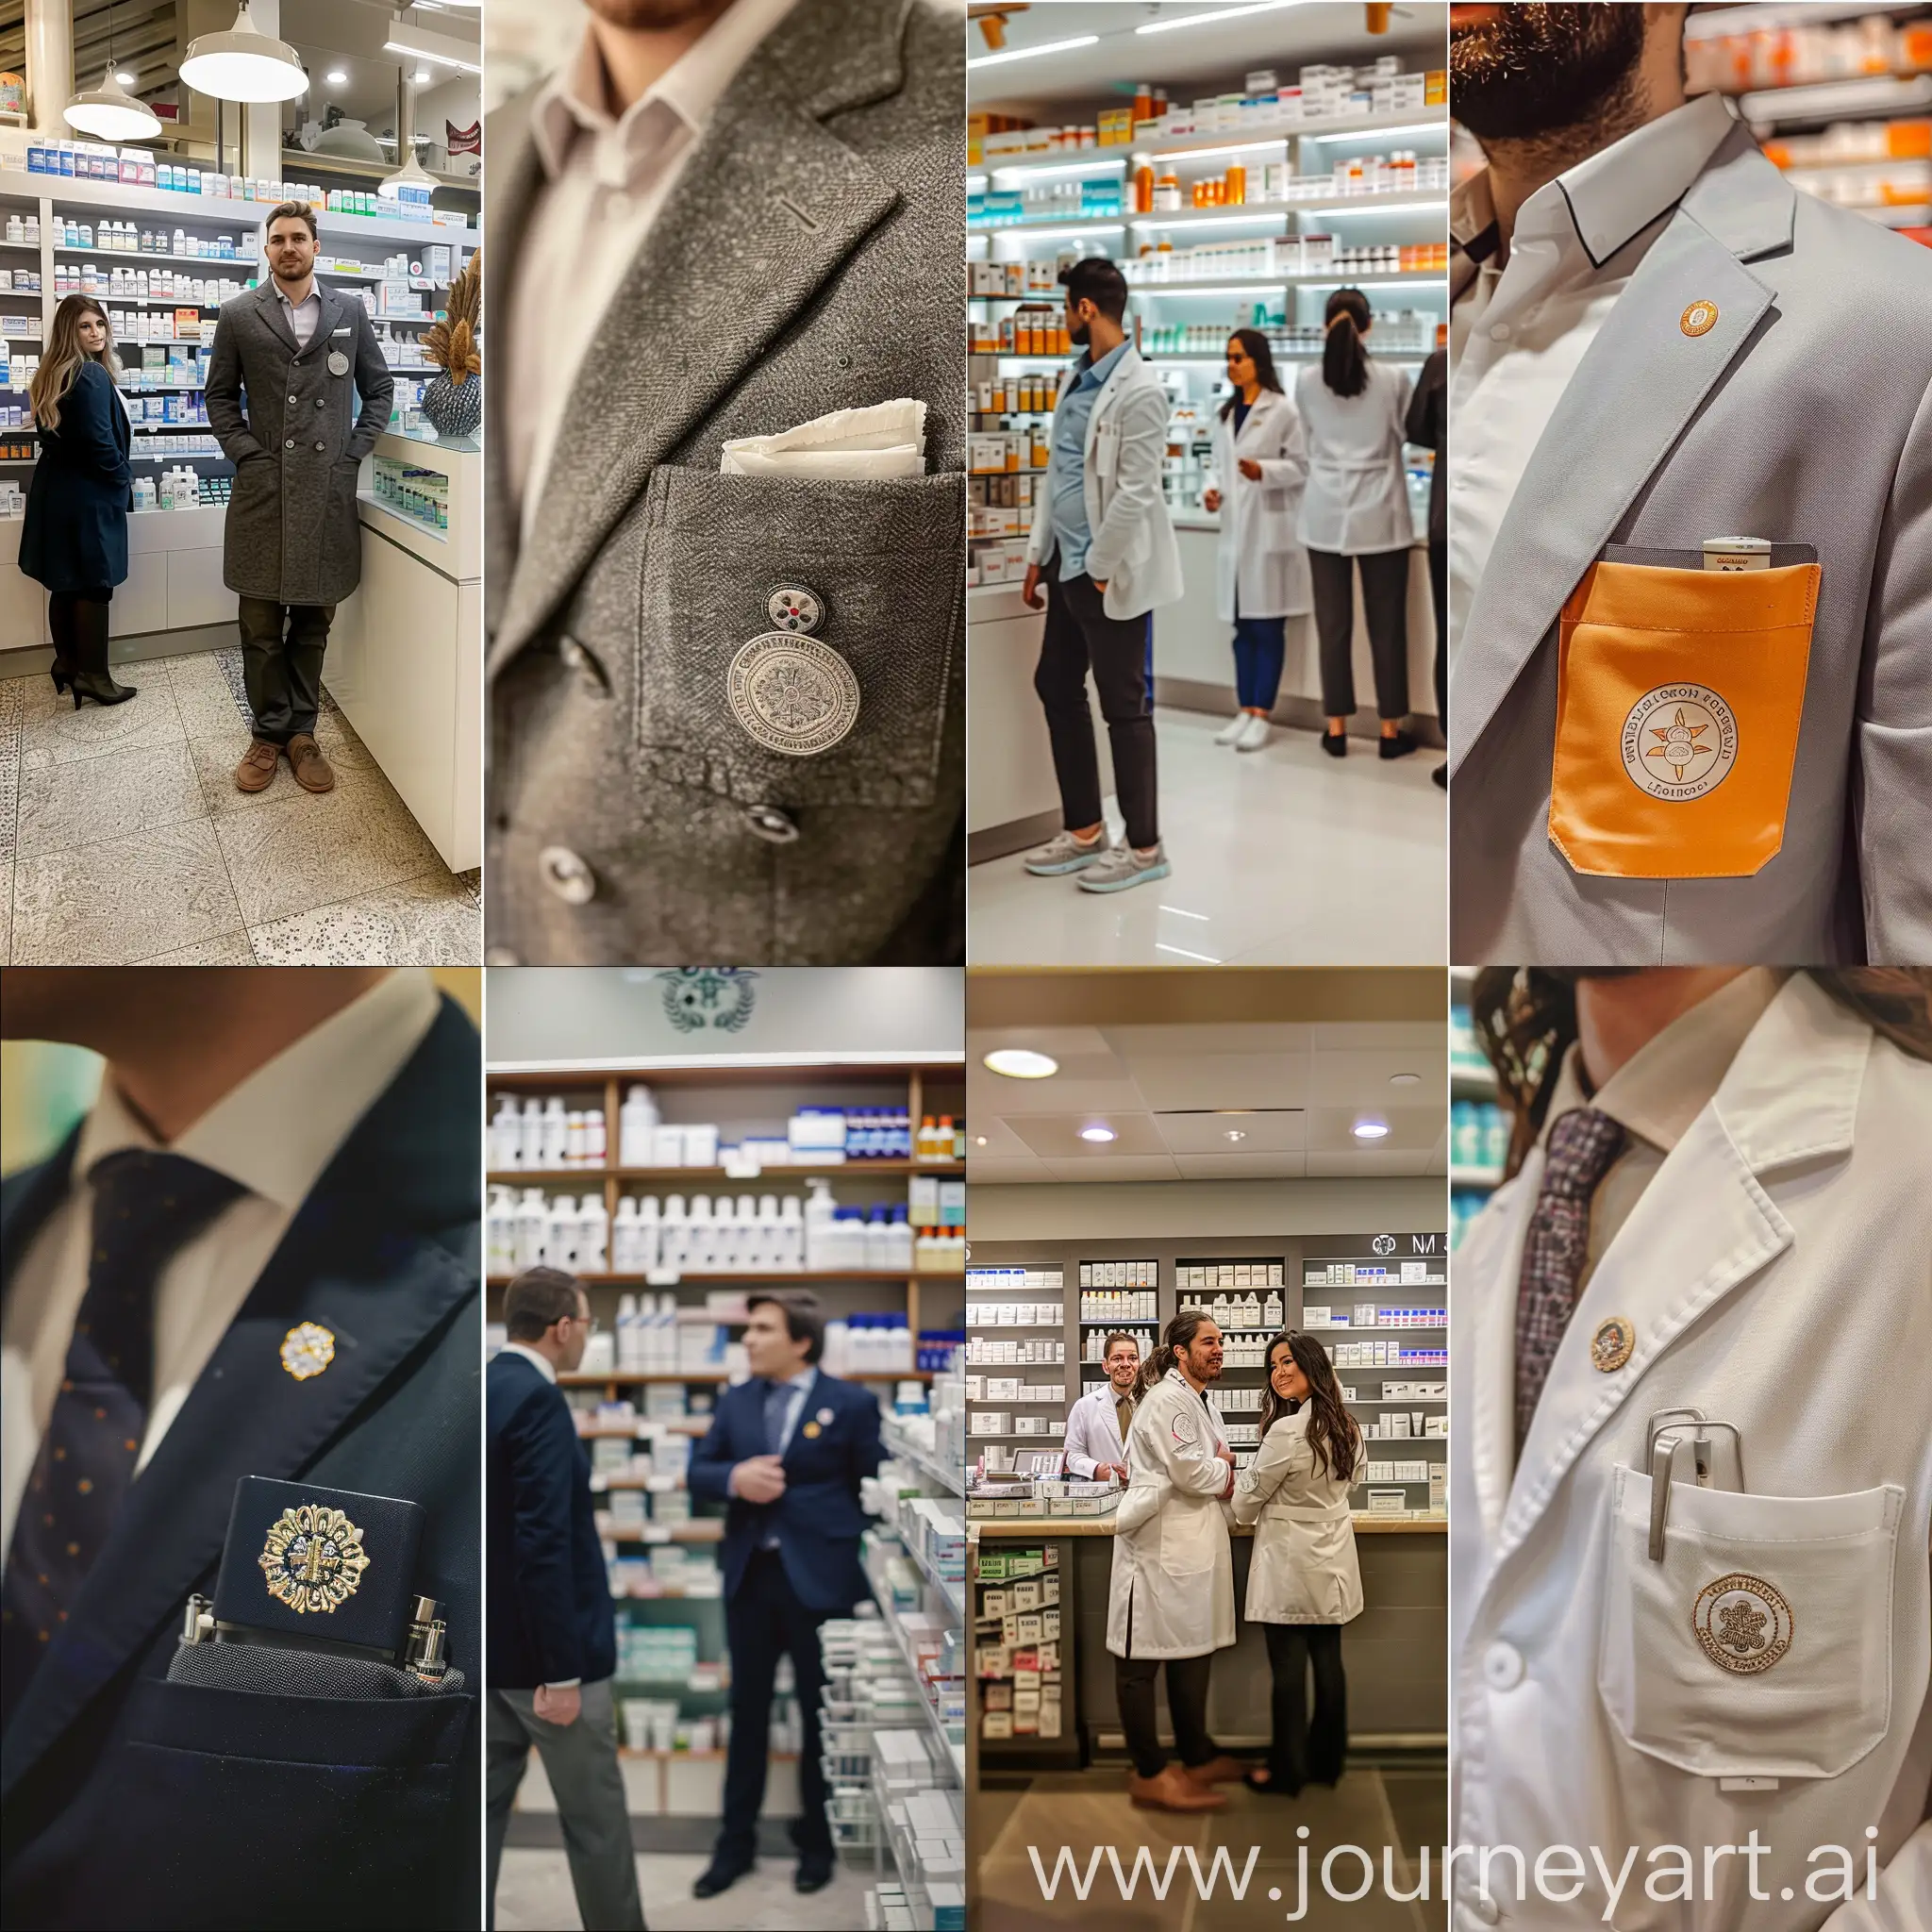 Pharmacy-Interior-with-Staff-and-Logo-on-Coat-Pocket